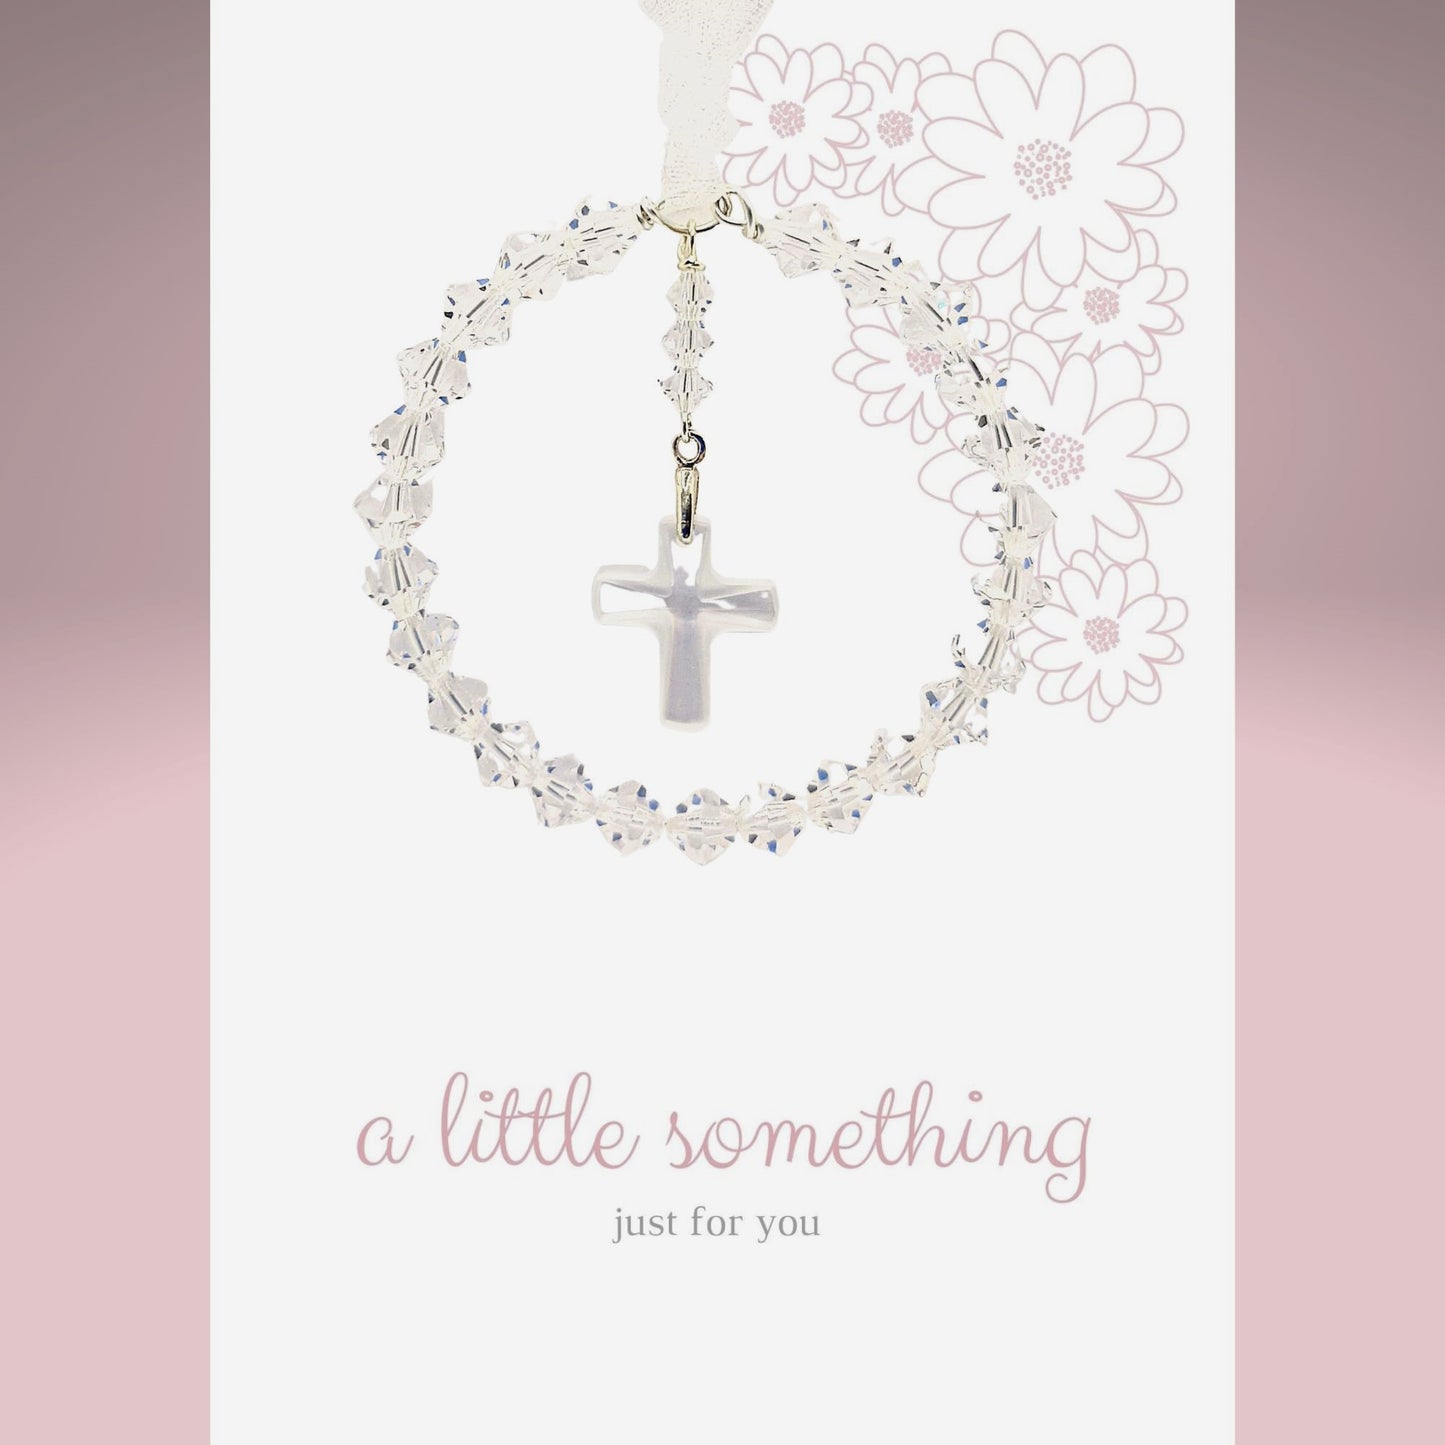 A circle of high grade austrian crystals surrounds a crystal cross suspended from the centre of the circle. Sparkling crystal ribbon completes the charm. Shown on a pre-printed card with the message "a little something just for you"